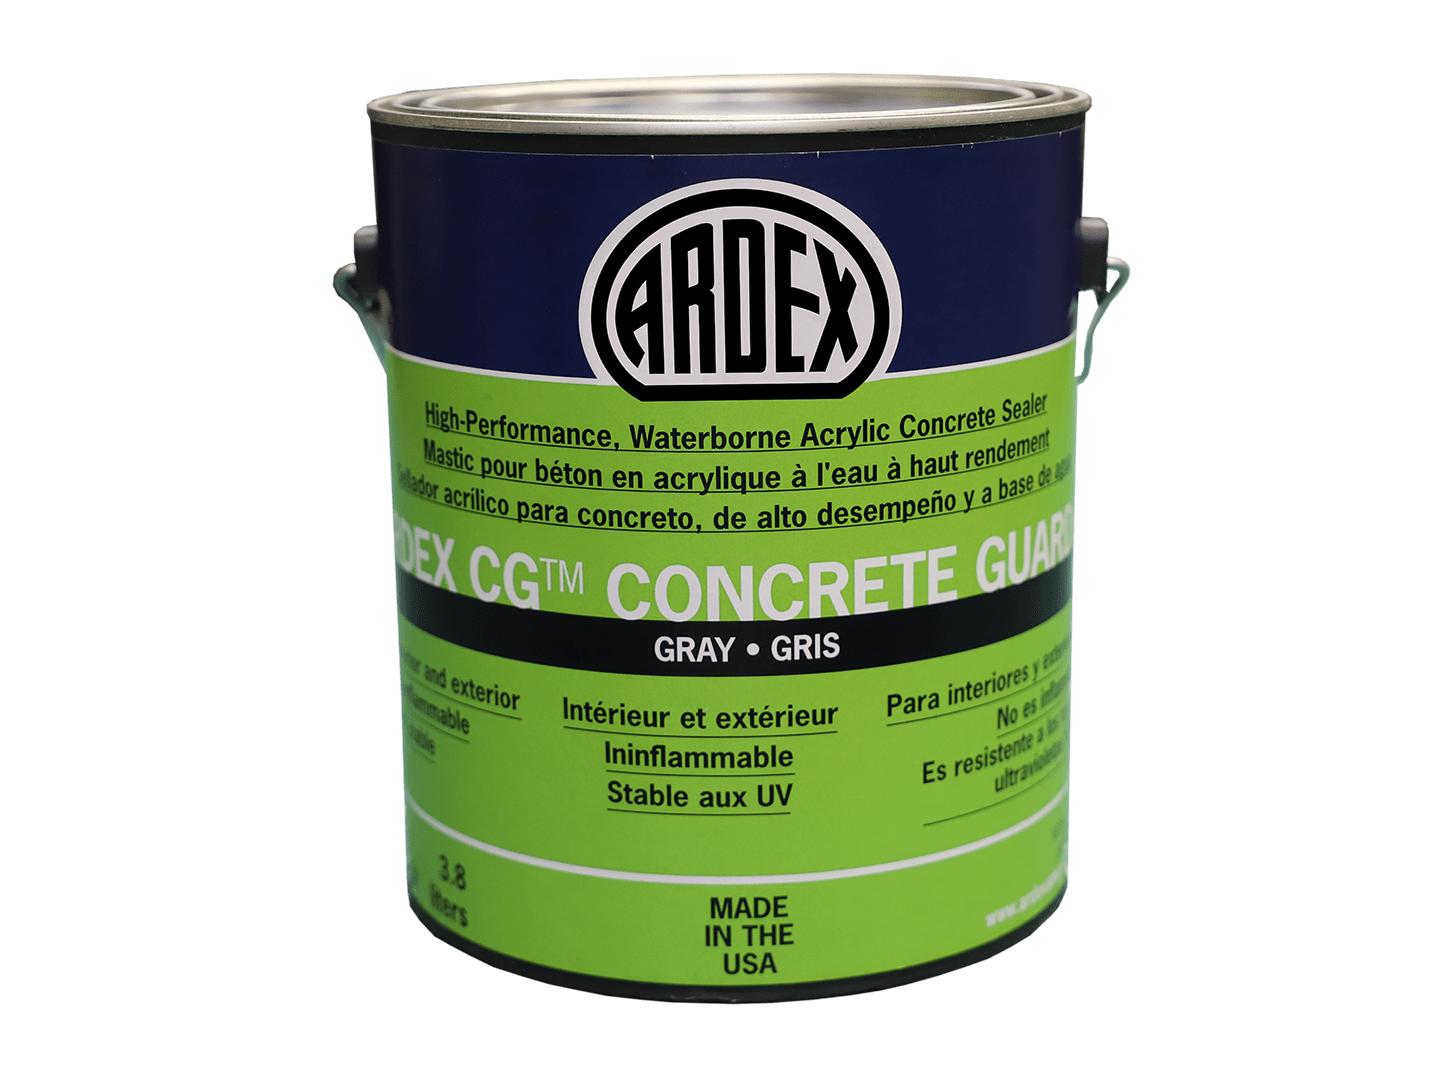 Ardex (11963) product